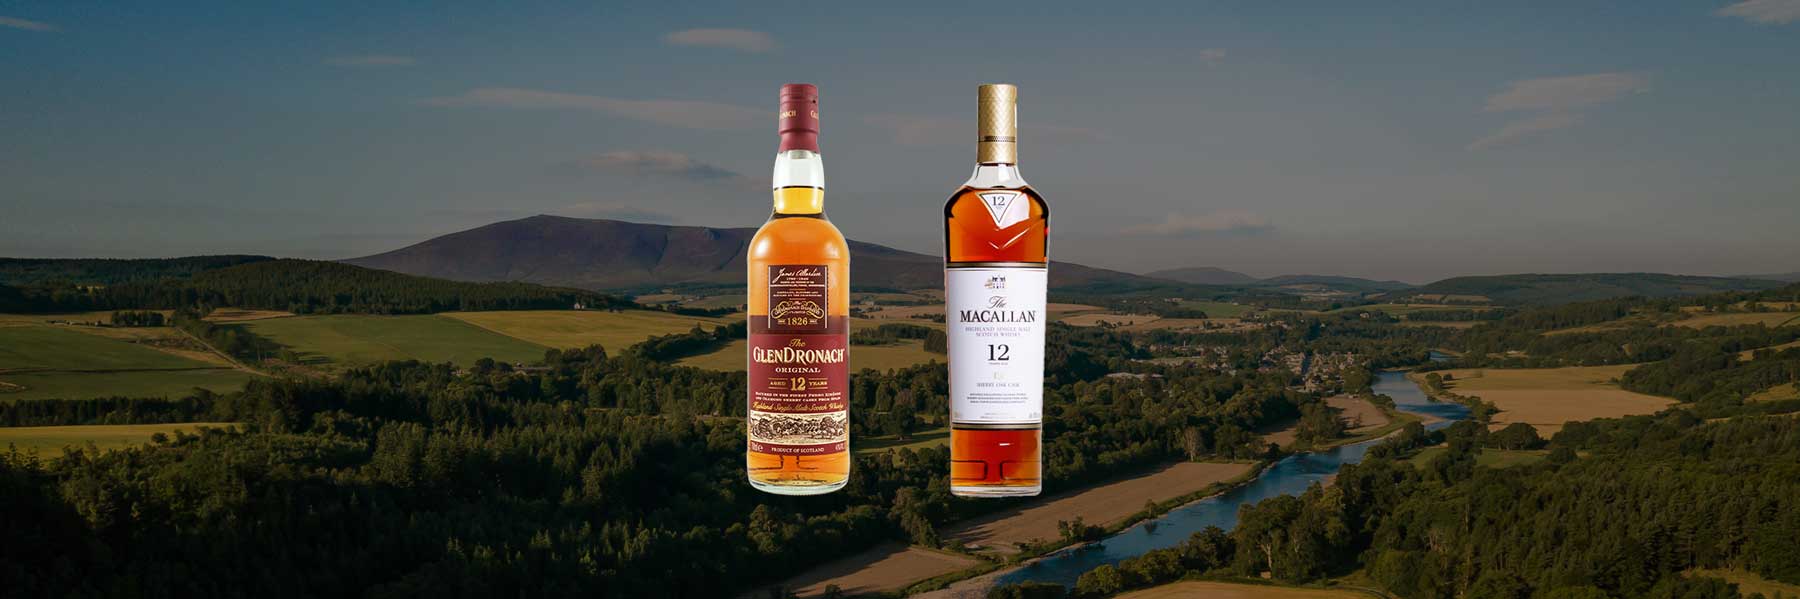 GlenDronach 12 vs Macallan 12 Whisky | Clash of The Sherry Titans From Highlands To Speyside